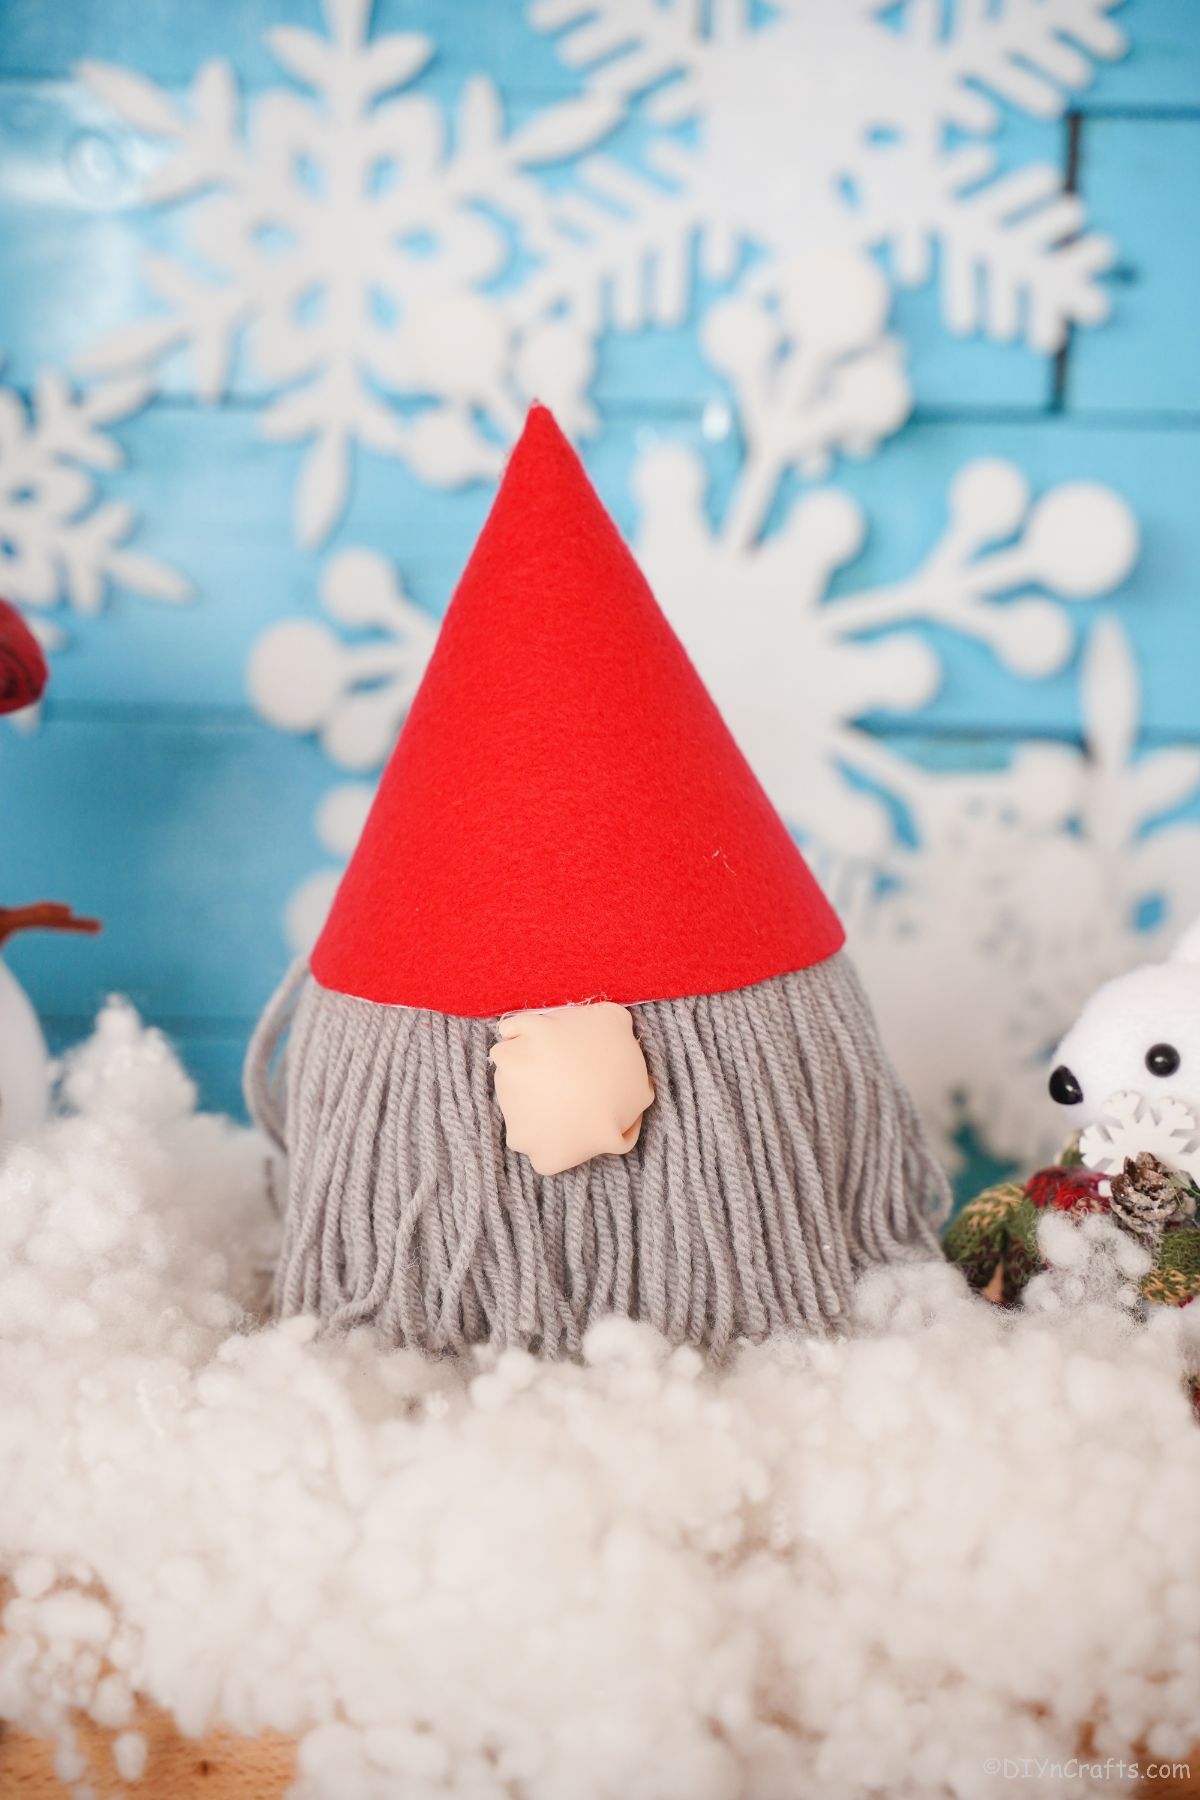 fake snow on table with blue background holding red hat gnome